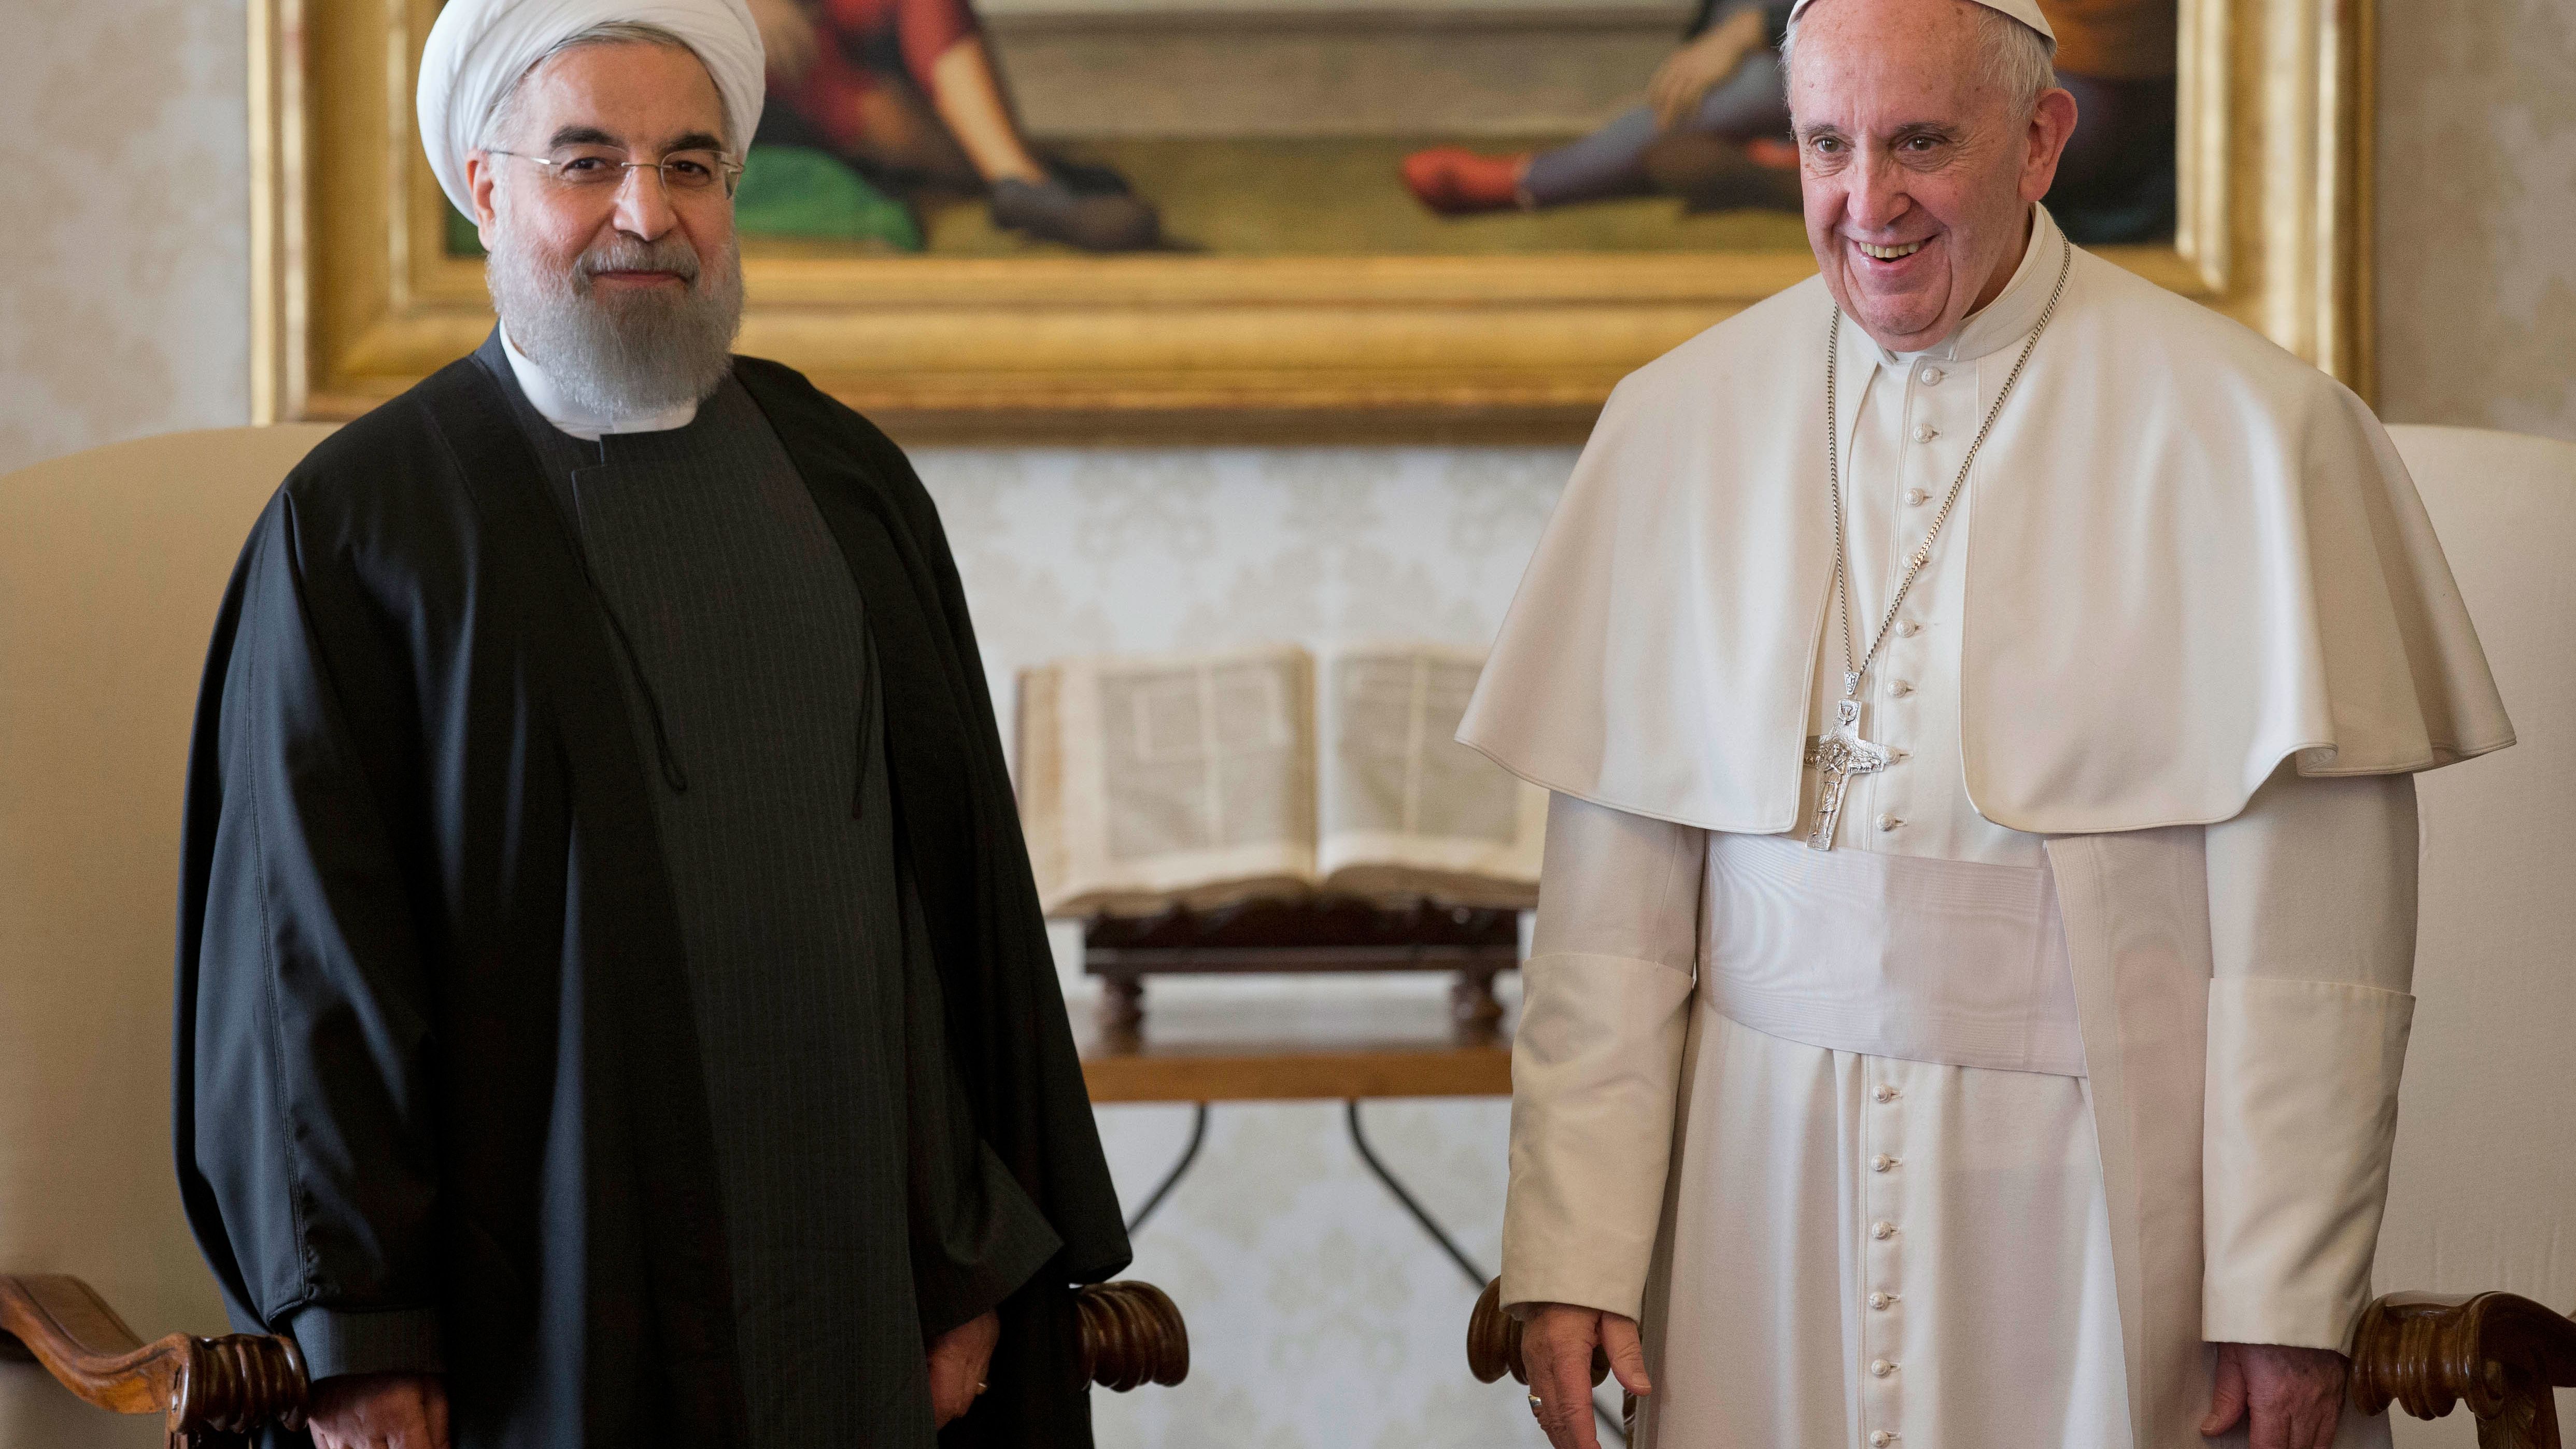 Pope Francis and Iranian President Hassan Rouhani pose for photographers at the Vatican on Tuesday, January 26.